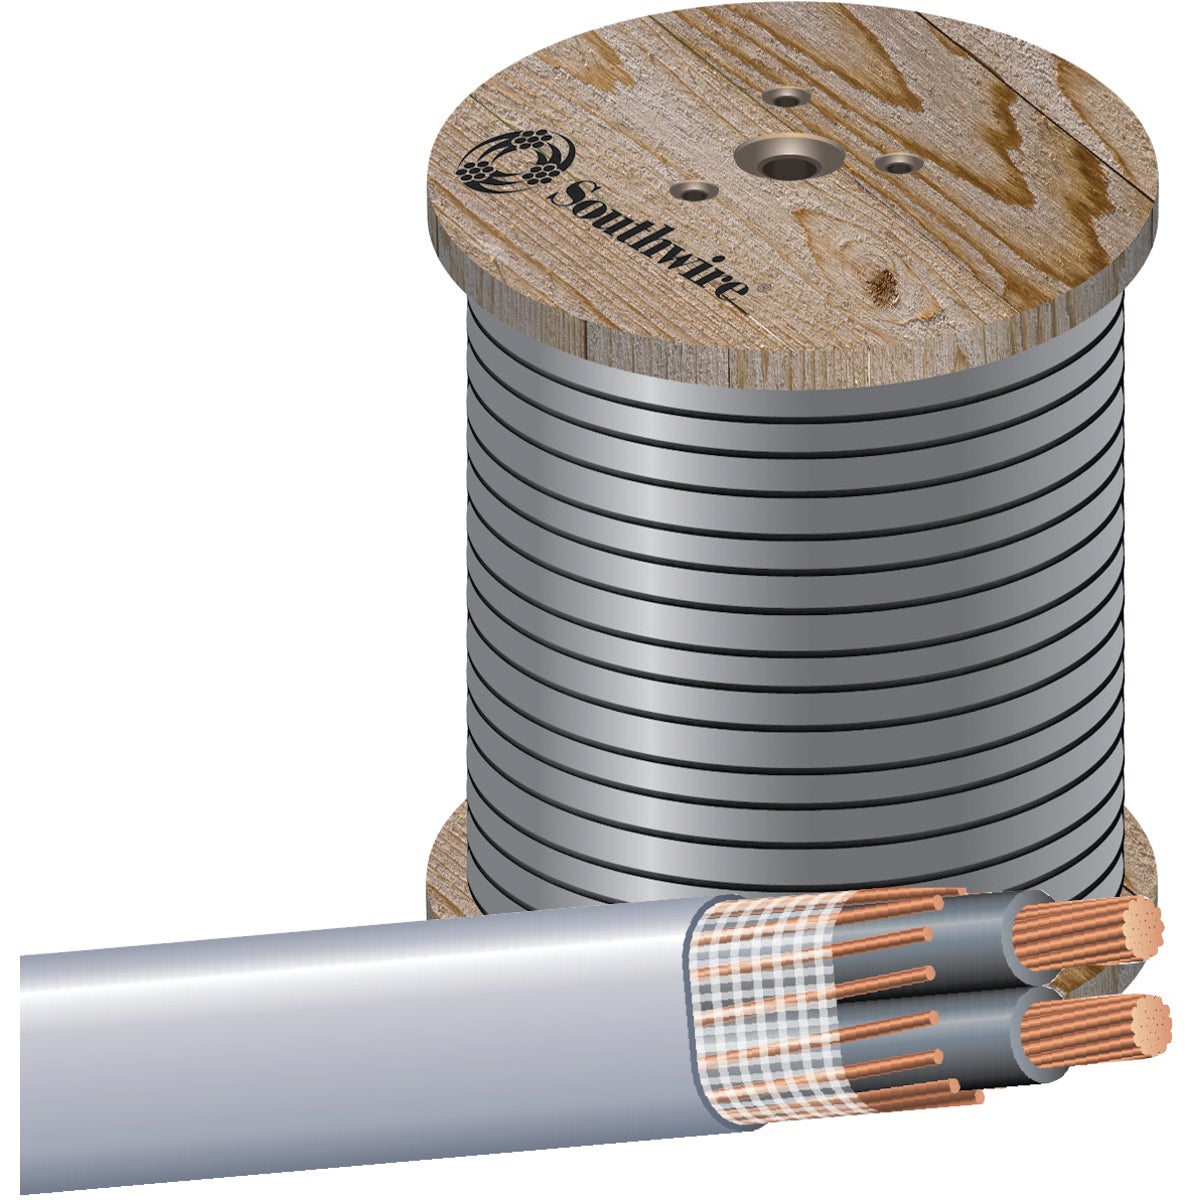 Item 506919, SEU copper service entrance cable can be used for service from pole to 